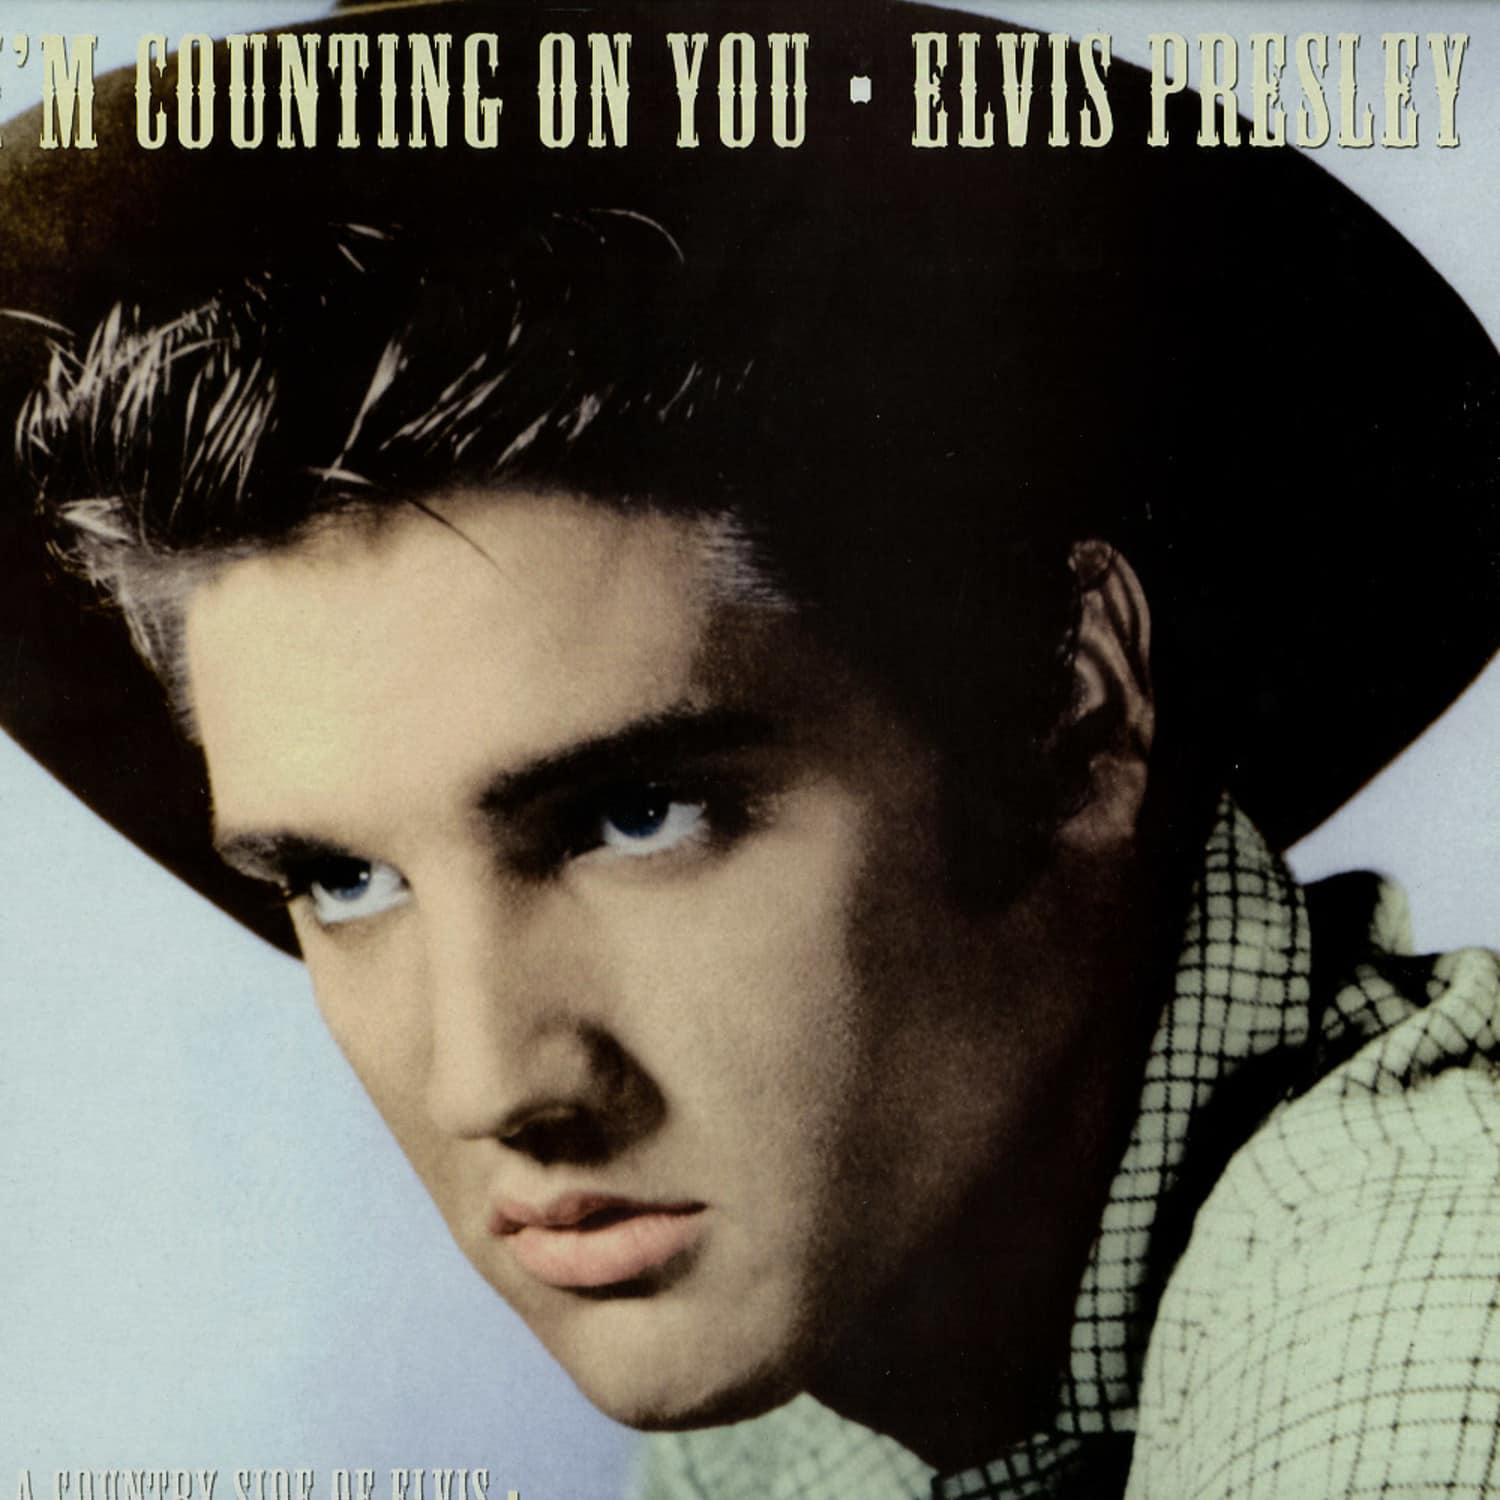 Elvis Presley - I M COUNTING ON YOU 